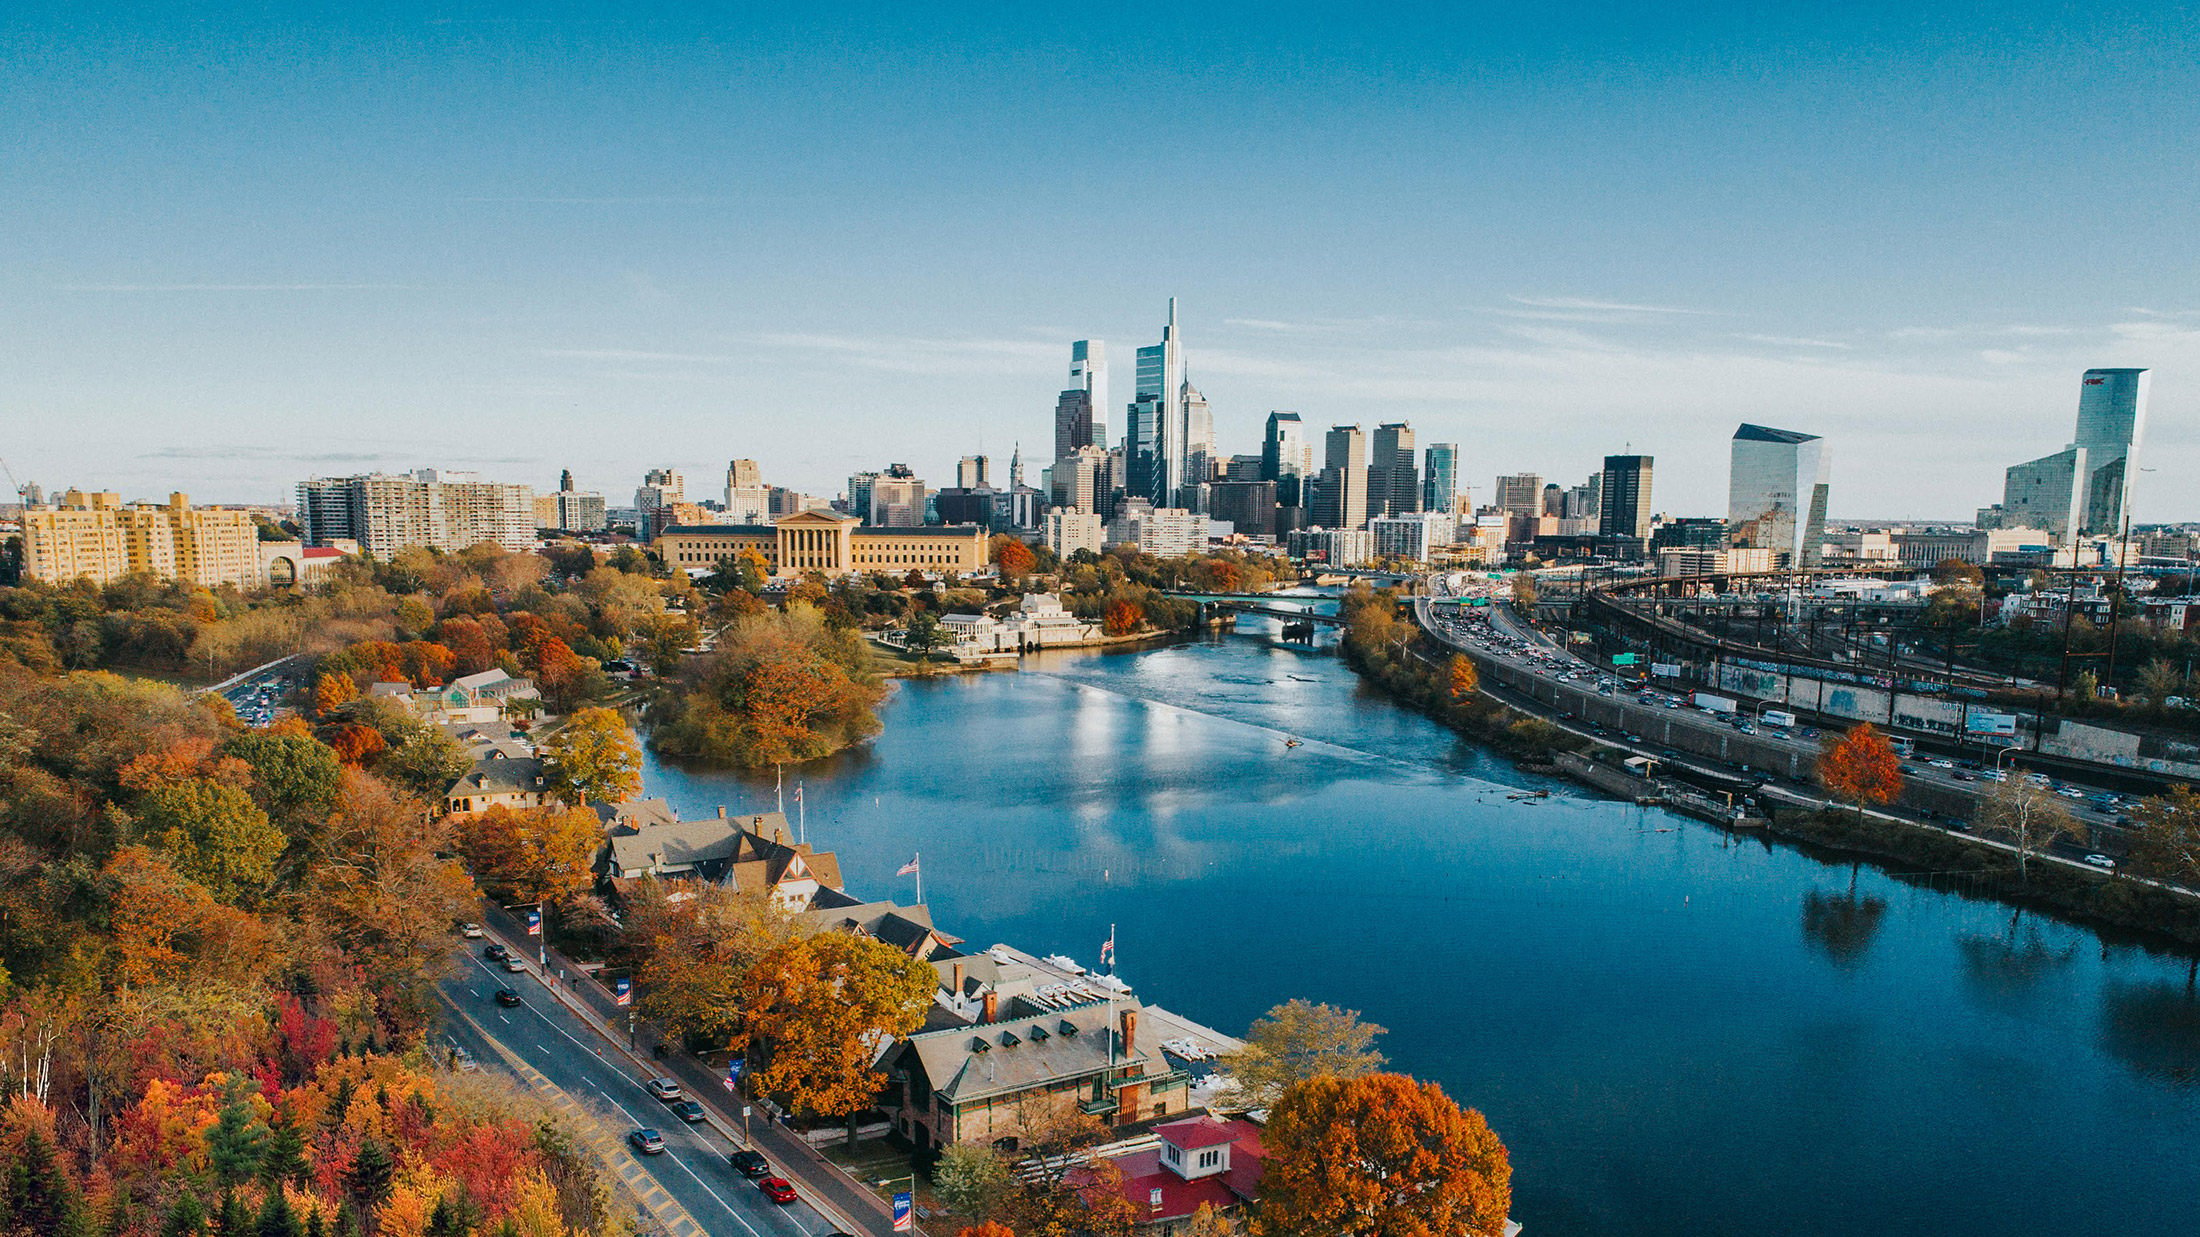 The Delaware River runs through the city of Philadelphia. Photo: Visit Philly